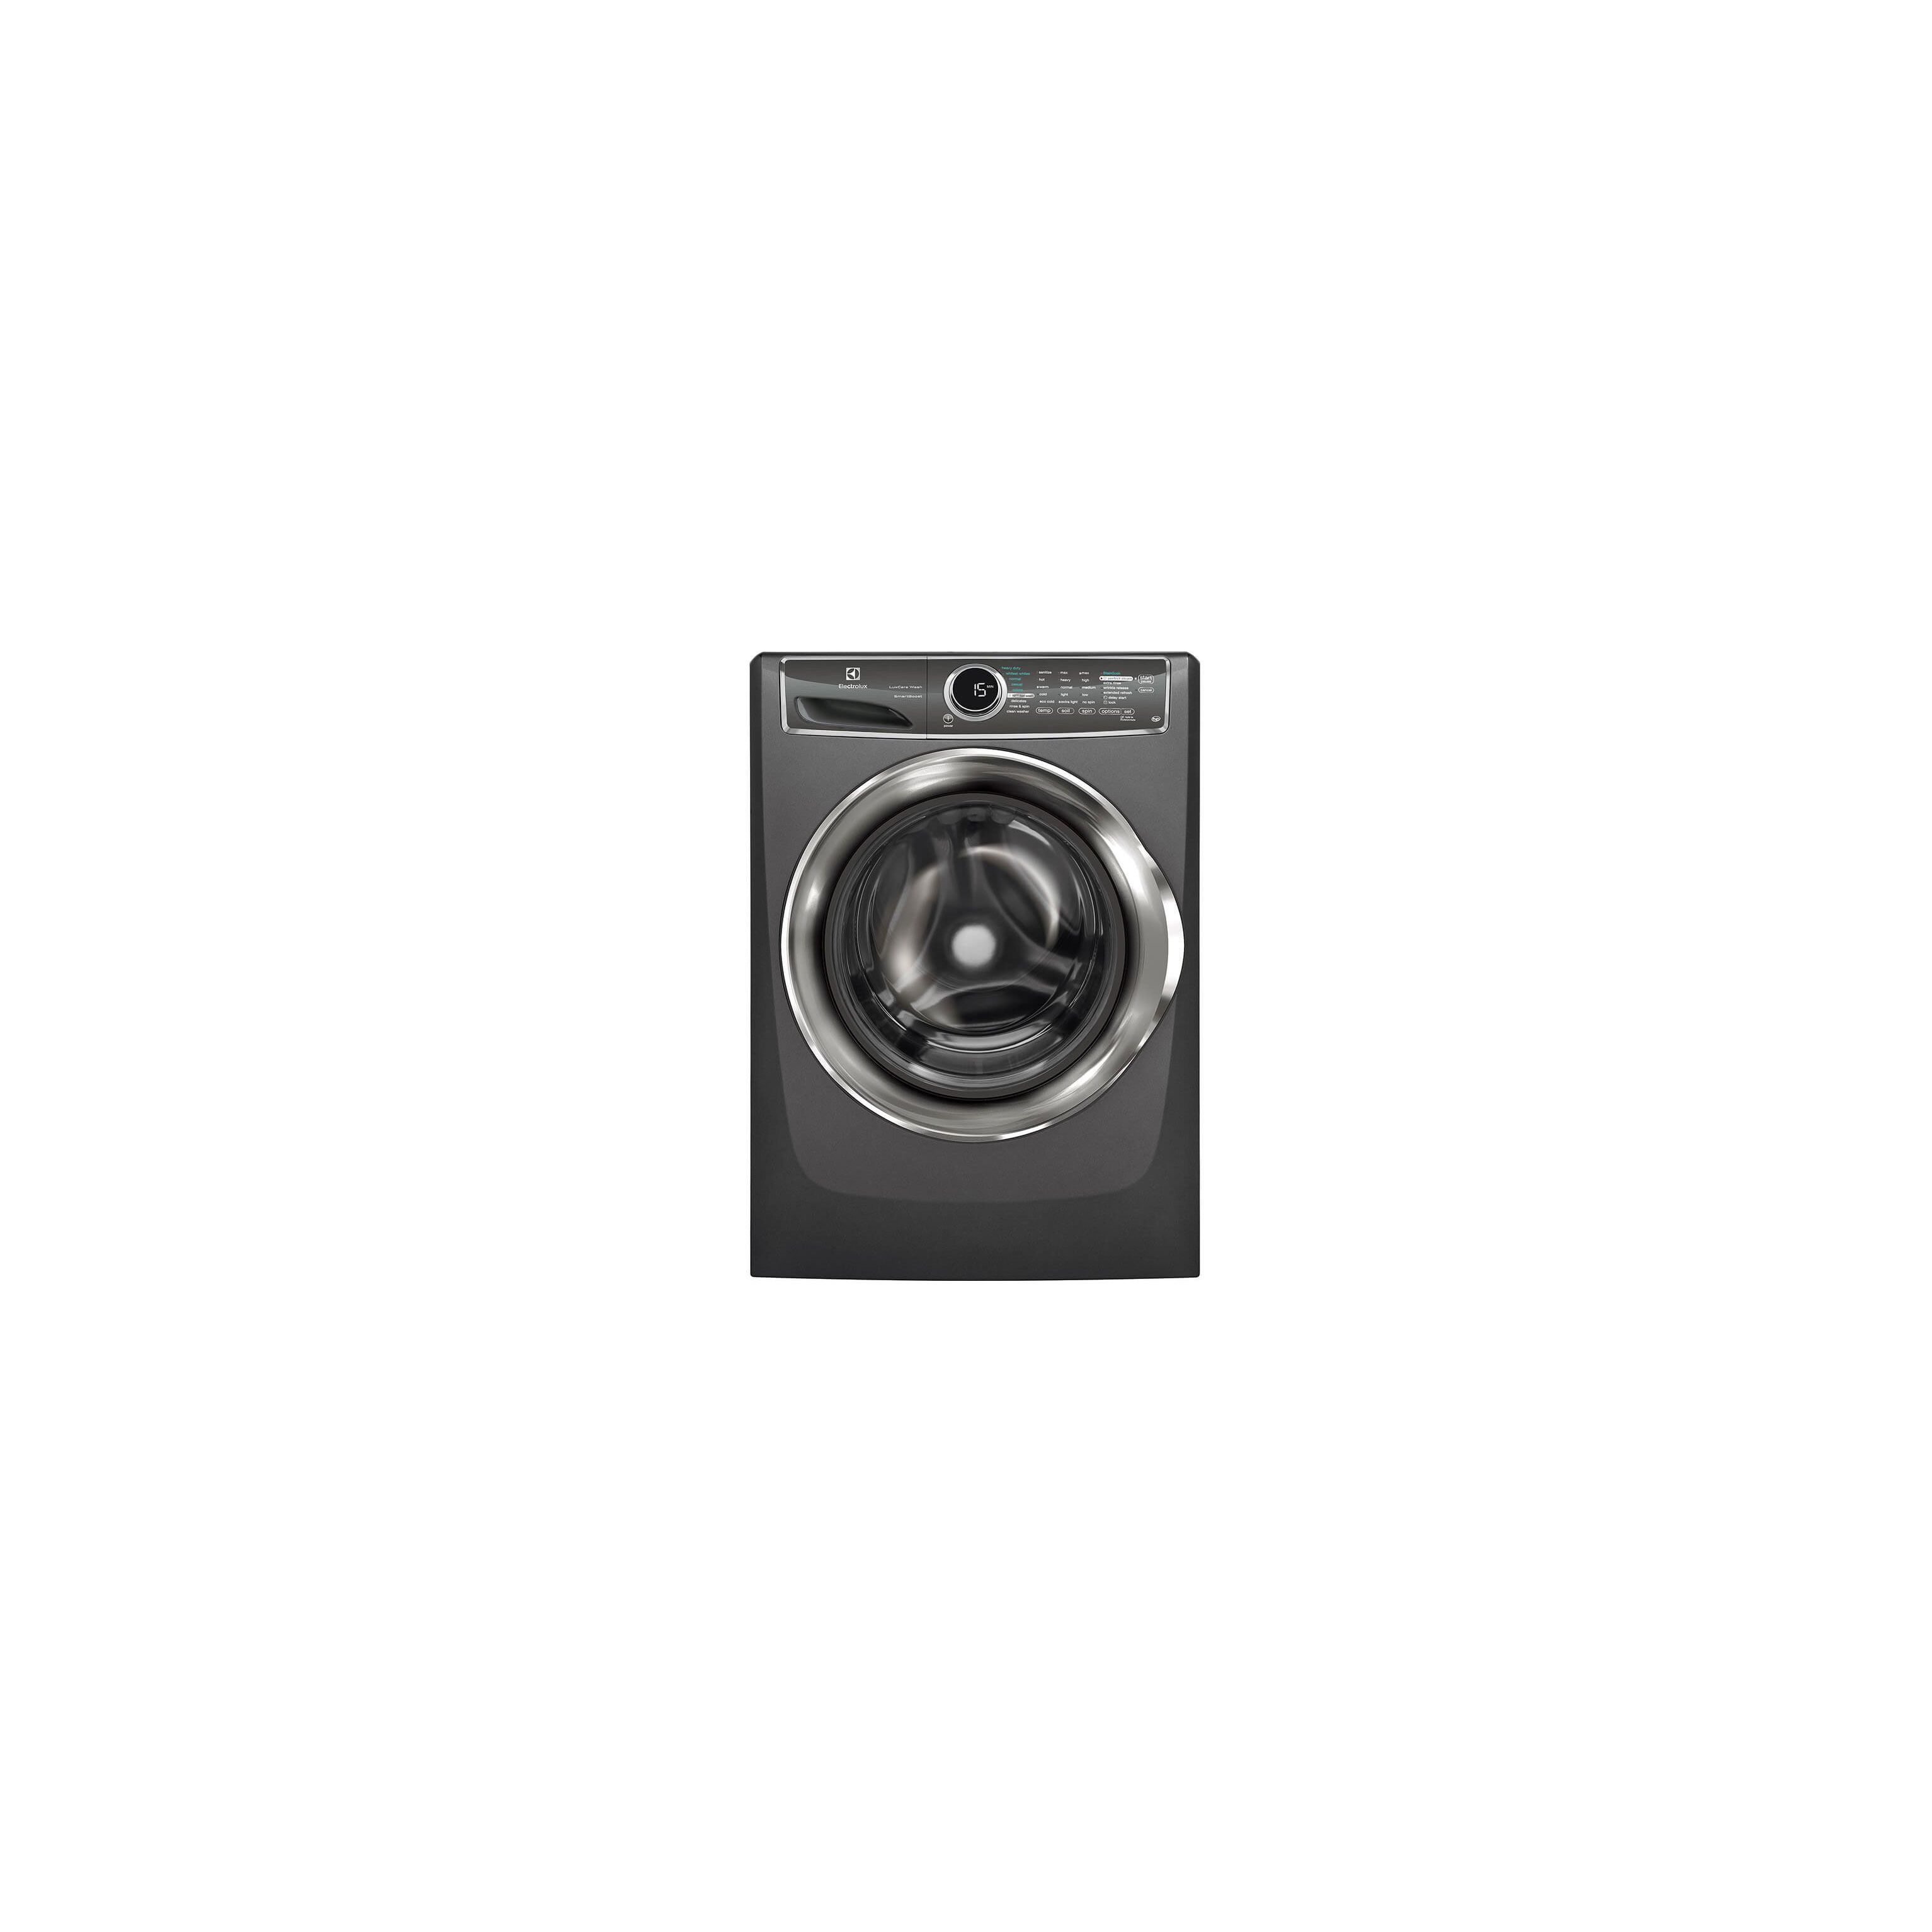 Whirlpool WTW57ESVW 27 Inch Top-Load Washer with 4.0 cu. ft. Capacity,  Multiple Wash Cycles, 6 Temperature Settings, Xtra Roll Action Plus  Agitator and Quiet Wash Noise Reduction System